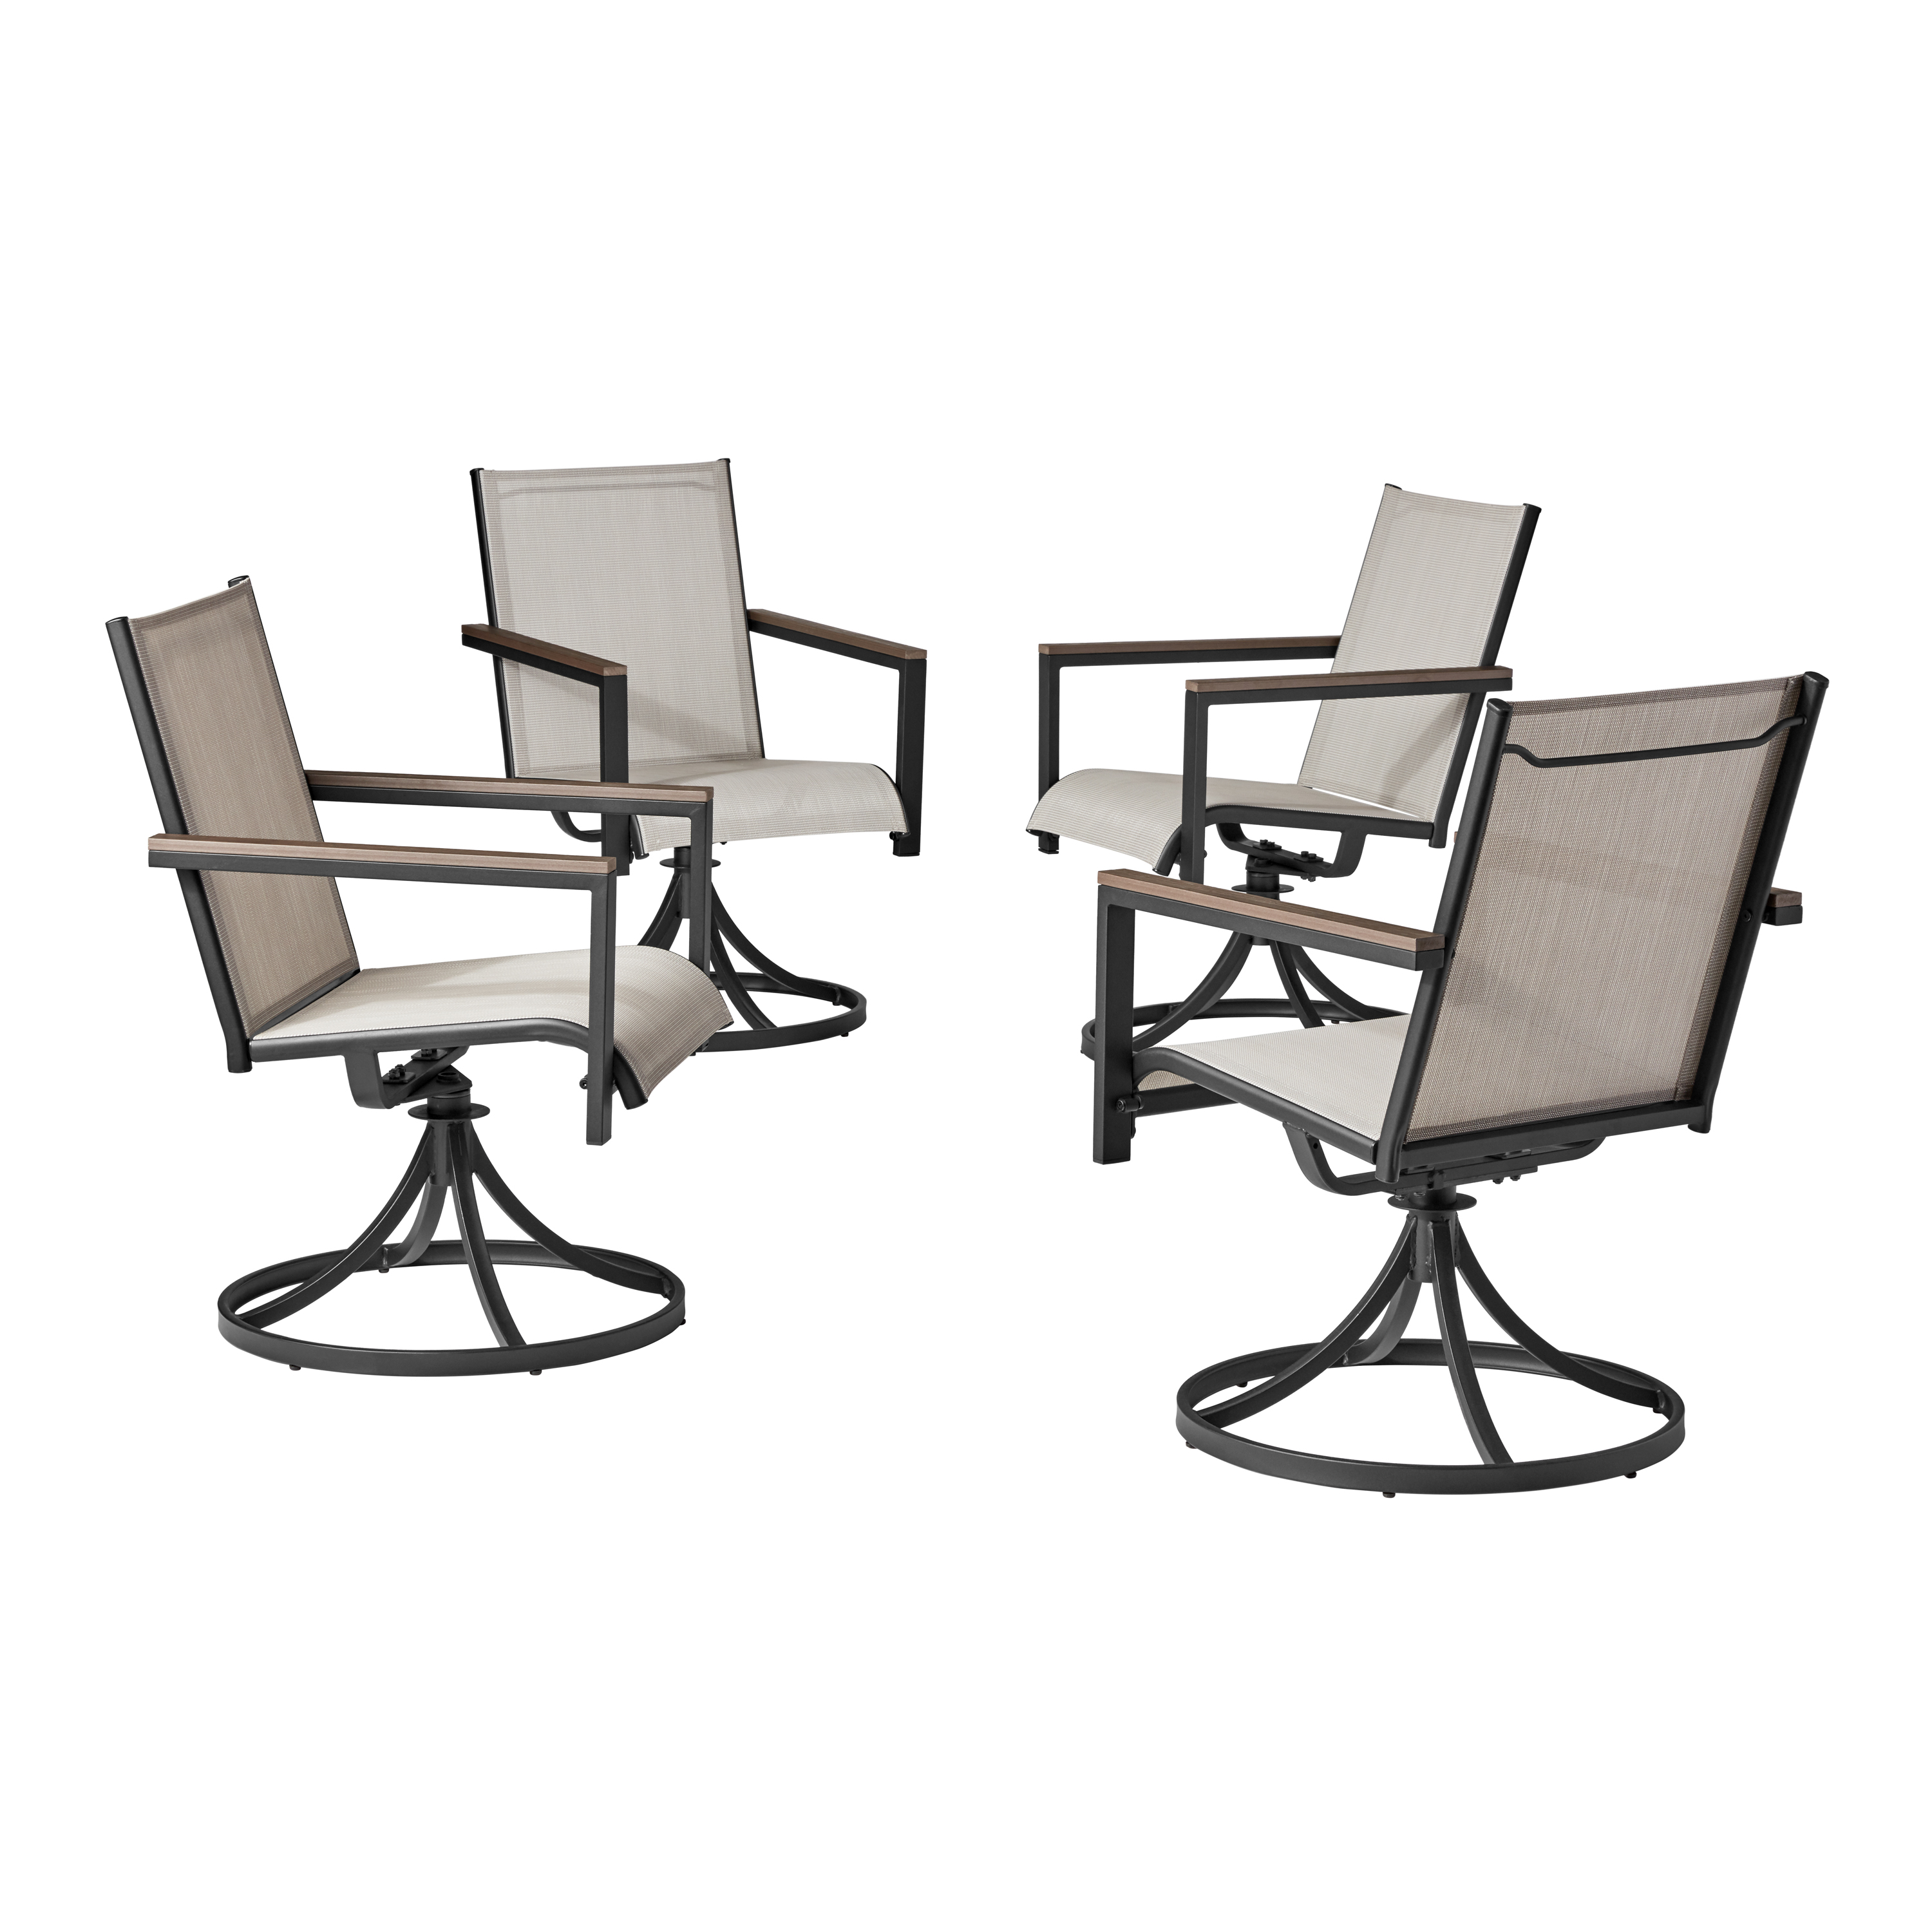 Grand Leisure Hans Outdoor Dining Chair - Steel - Set of 4 - Gray - image 5 of 6